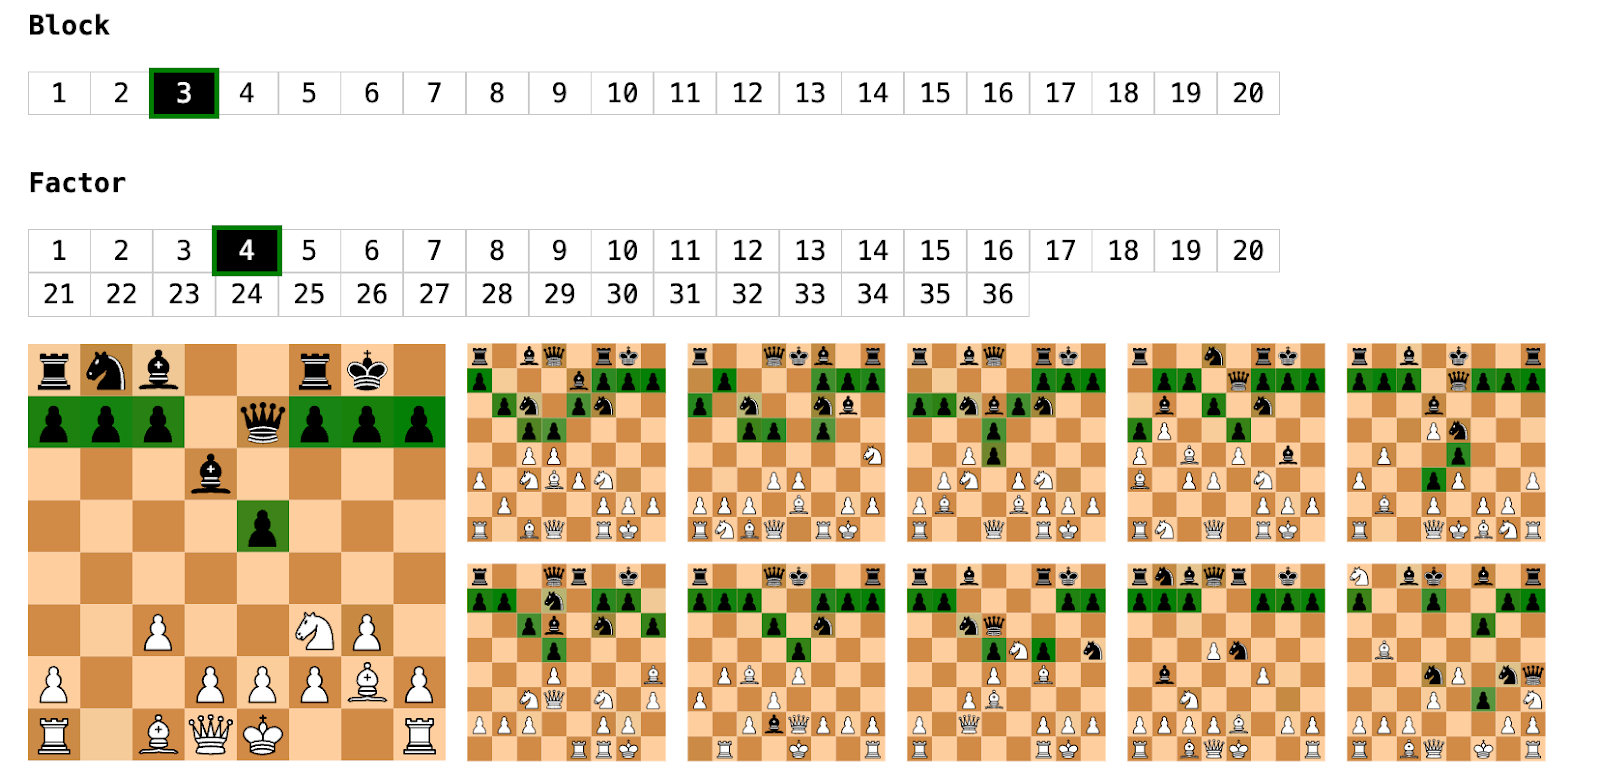 Chess960 (FRC): Two Important Chess.com Events